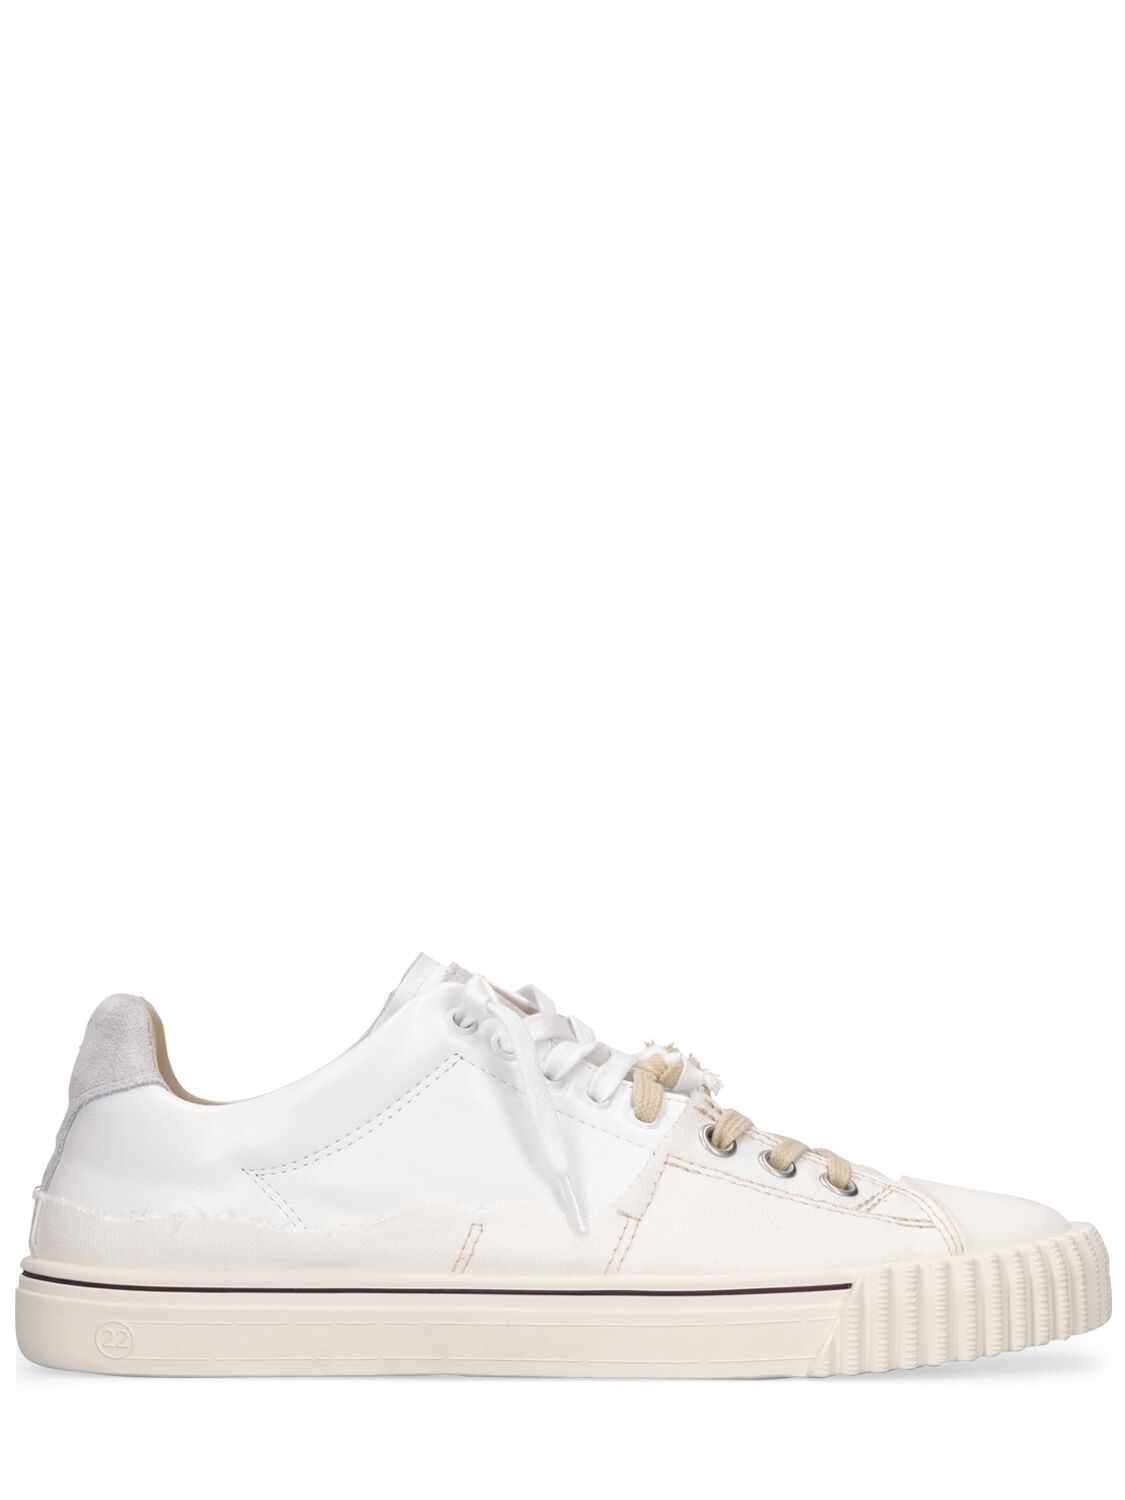 Maison Margiela Evolution Canvas & Leather Low Sneakers In White